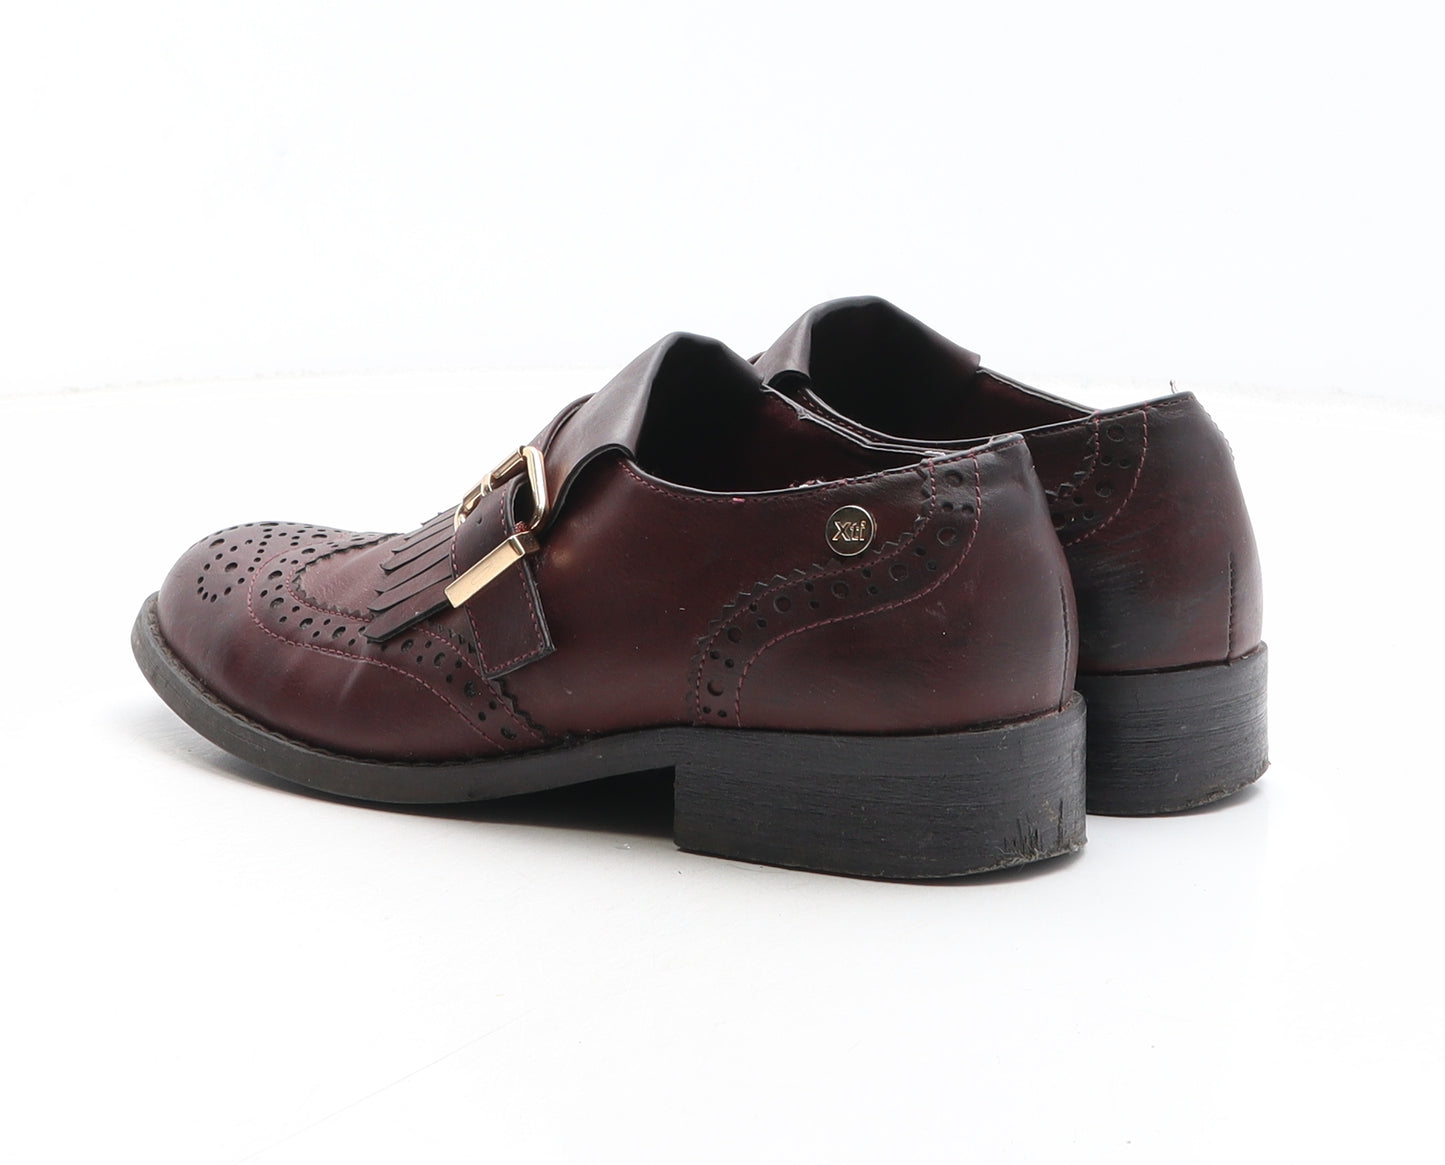 Xti Womens Brown Synthetic Slip On Casual UK - Brogue Style